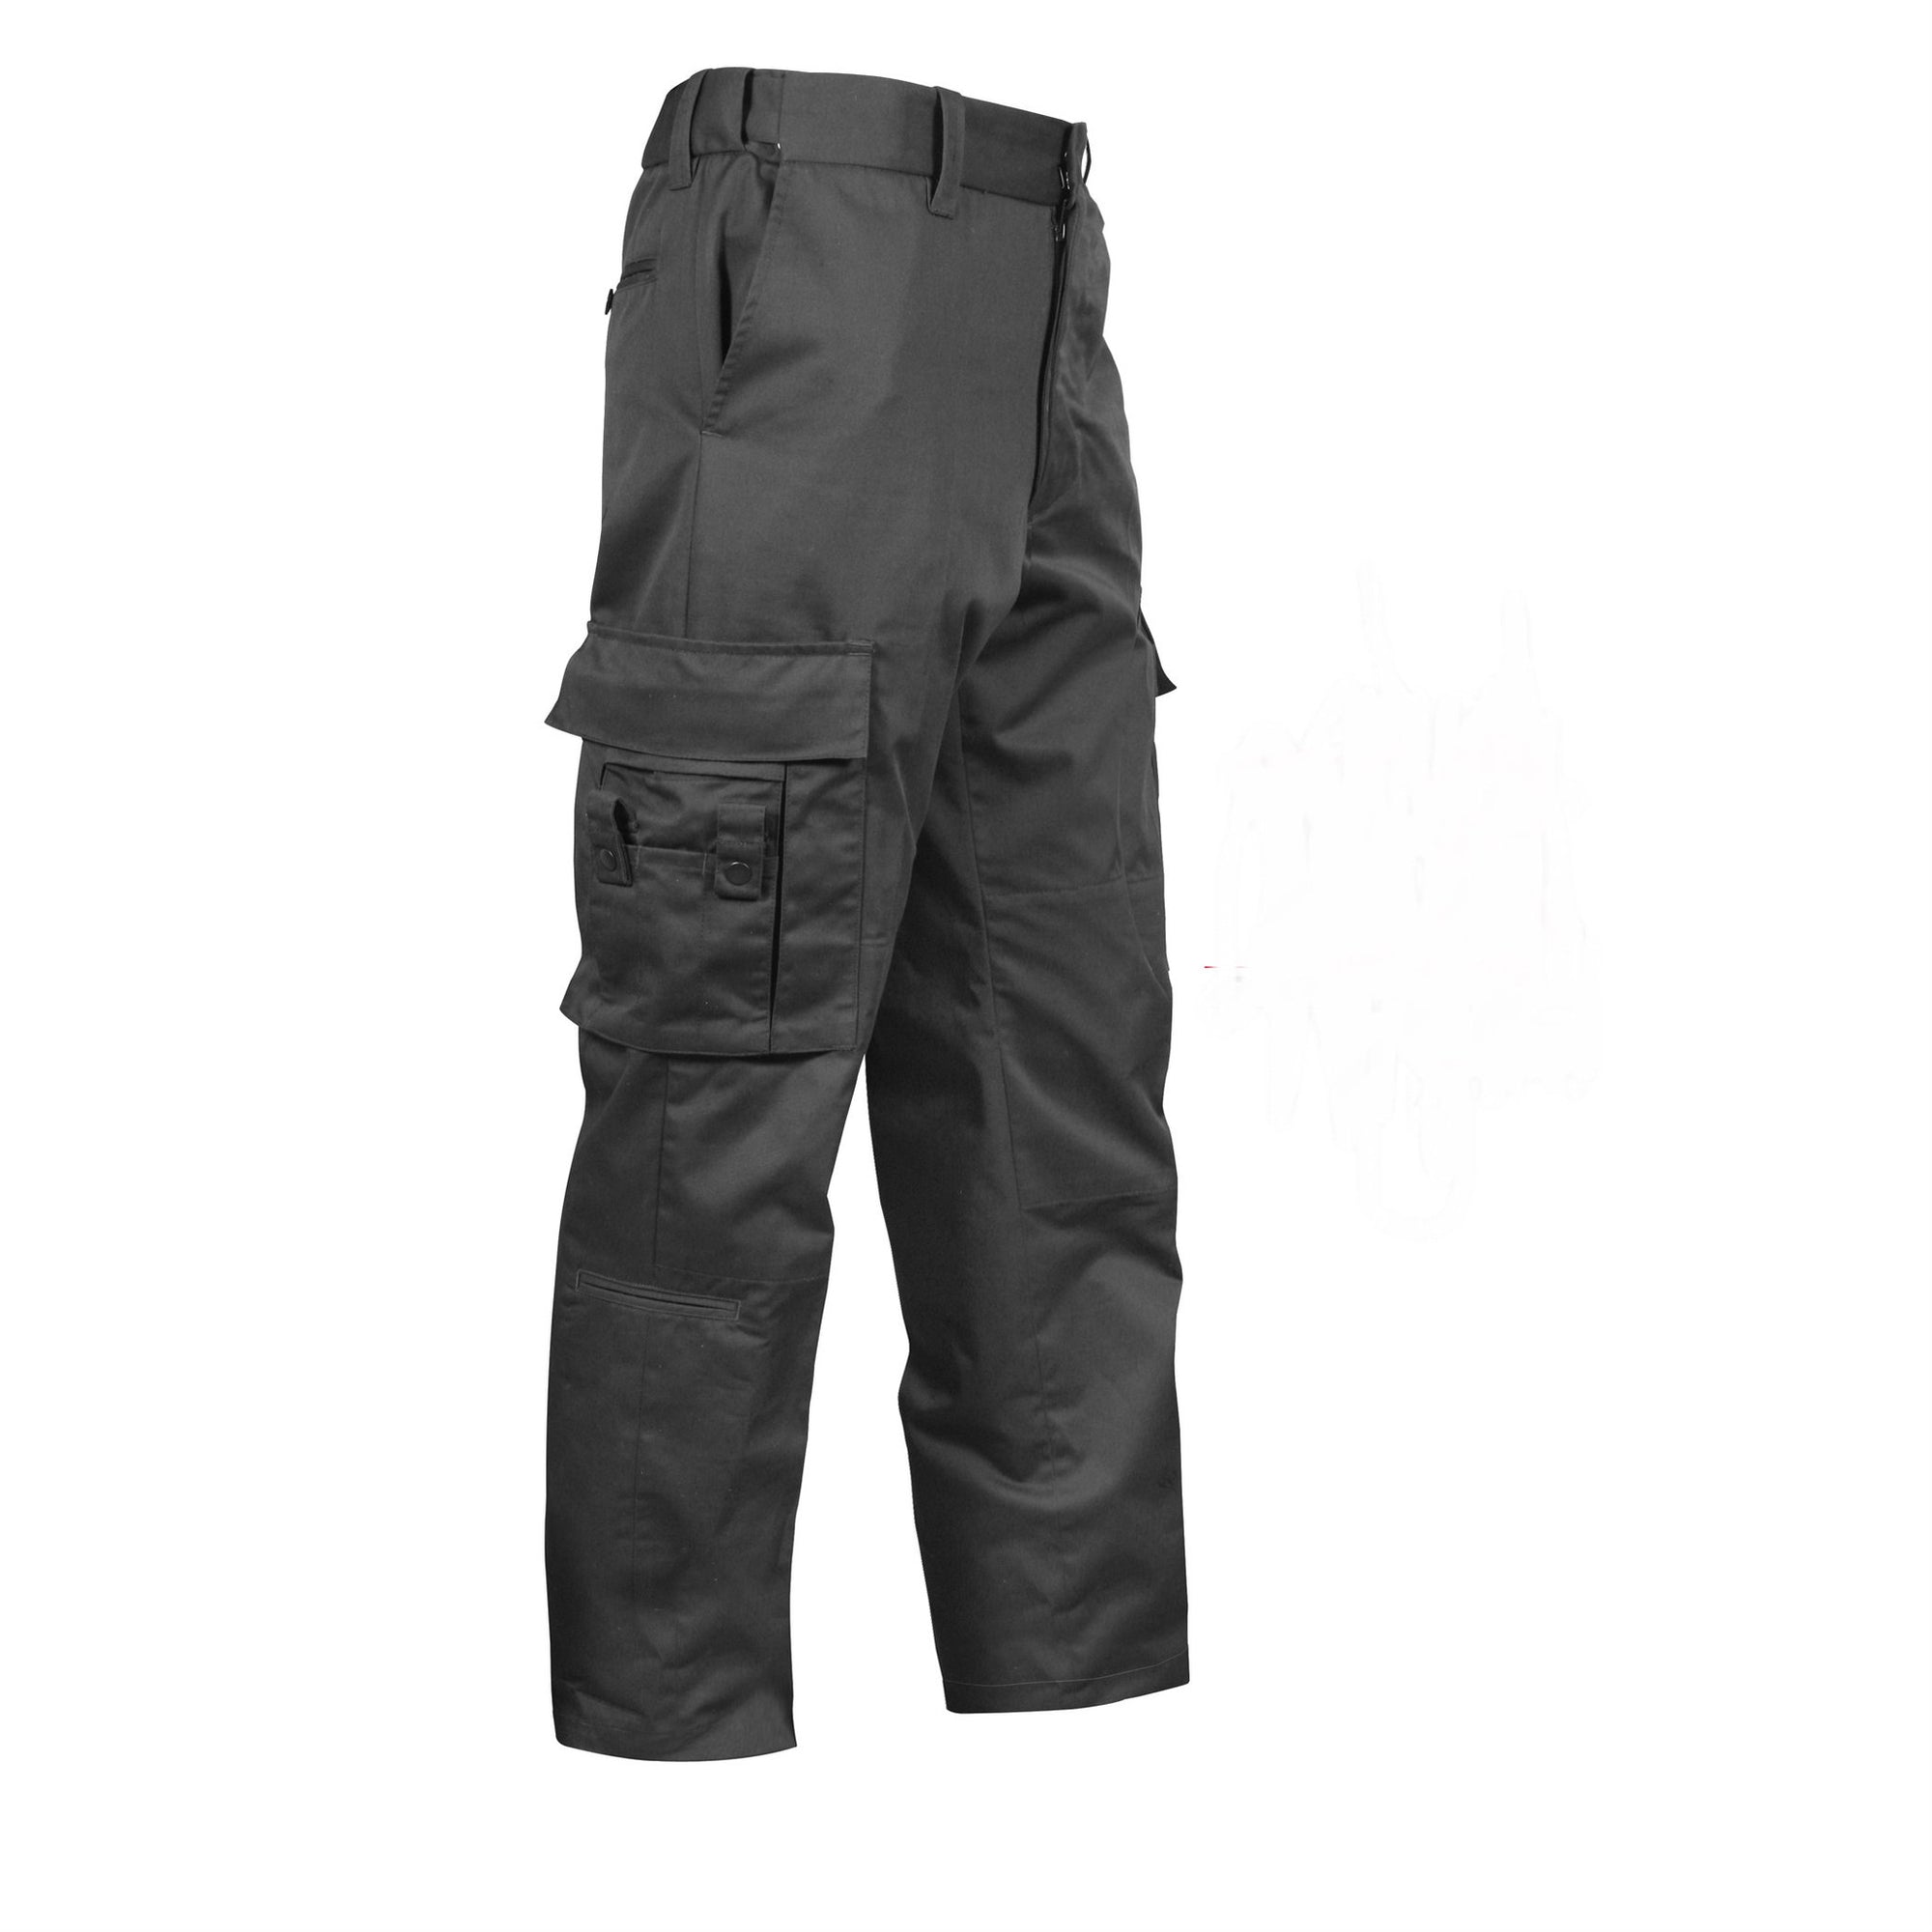 Dezsed Men's Outdoor Military Army Cargo Pants Clearance Men's Autumn New  Camouflage Plus Size Trousers And Feet Pants Loose Black XXXXXXL -  Walmart.com